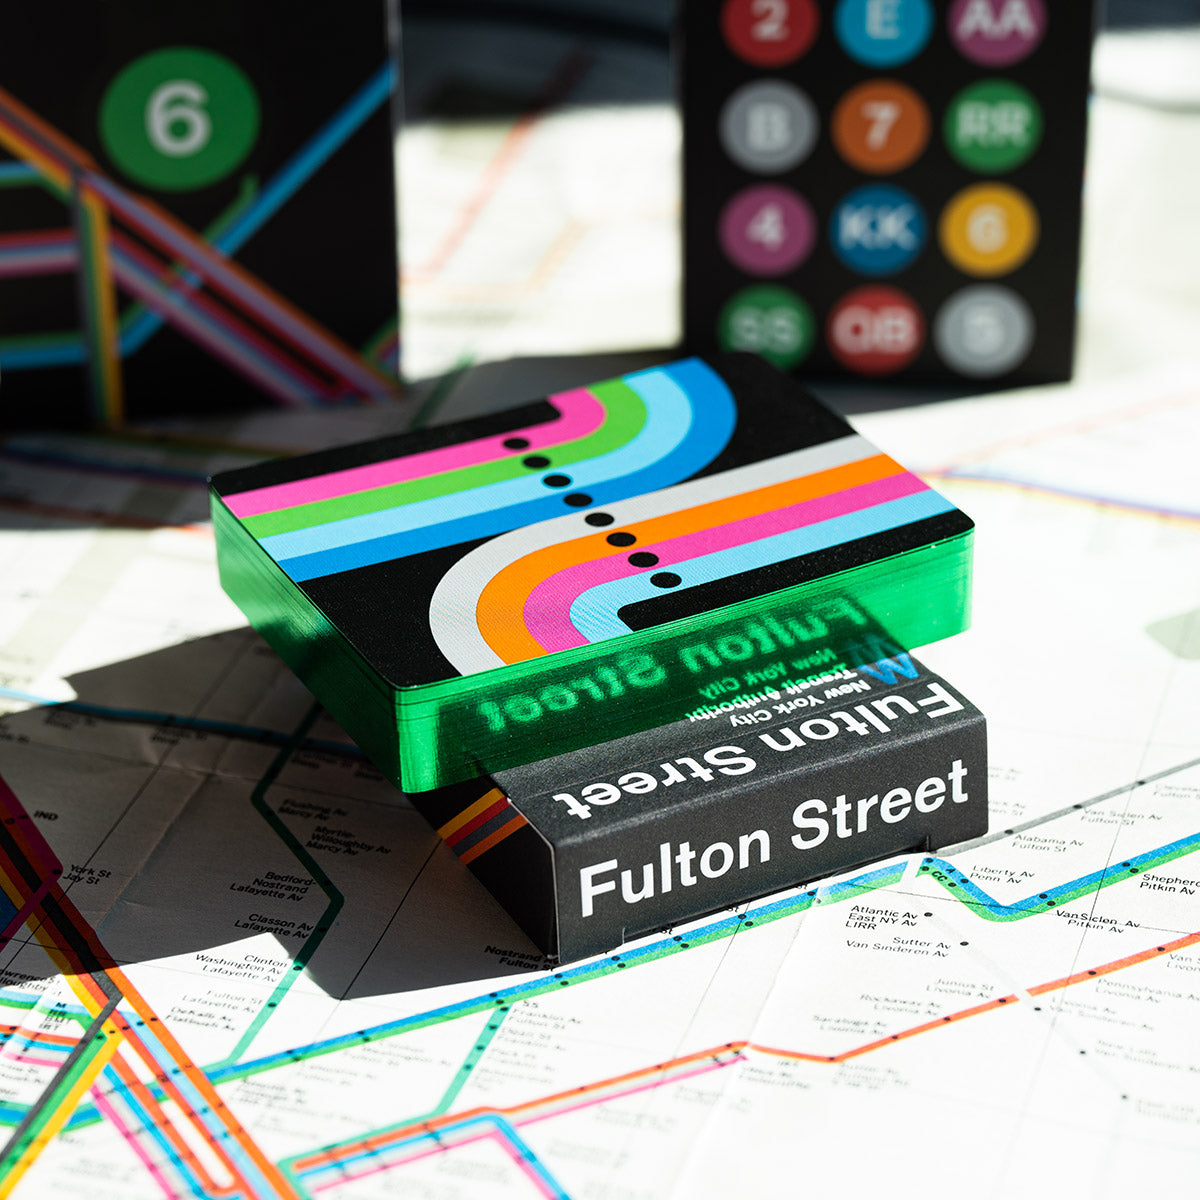 GILDED BLACK LIMITED EDITION FULTON STREET MTA PLAYING CARDS (1972 VIGNELLI MAP)